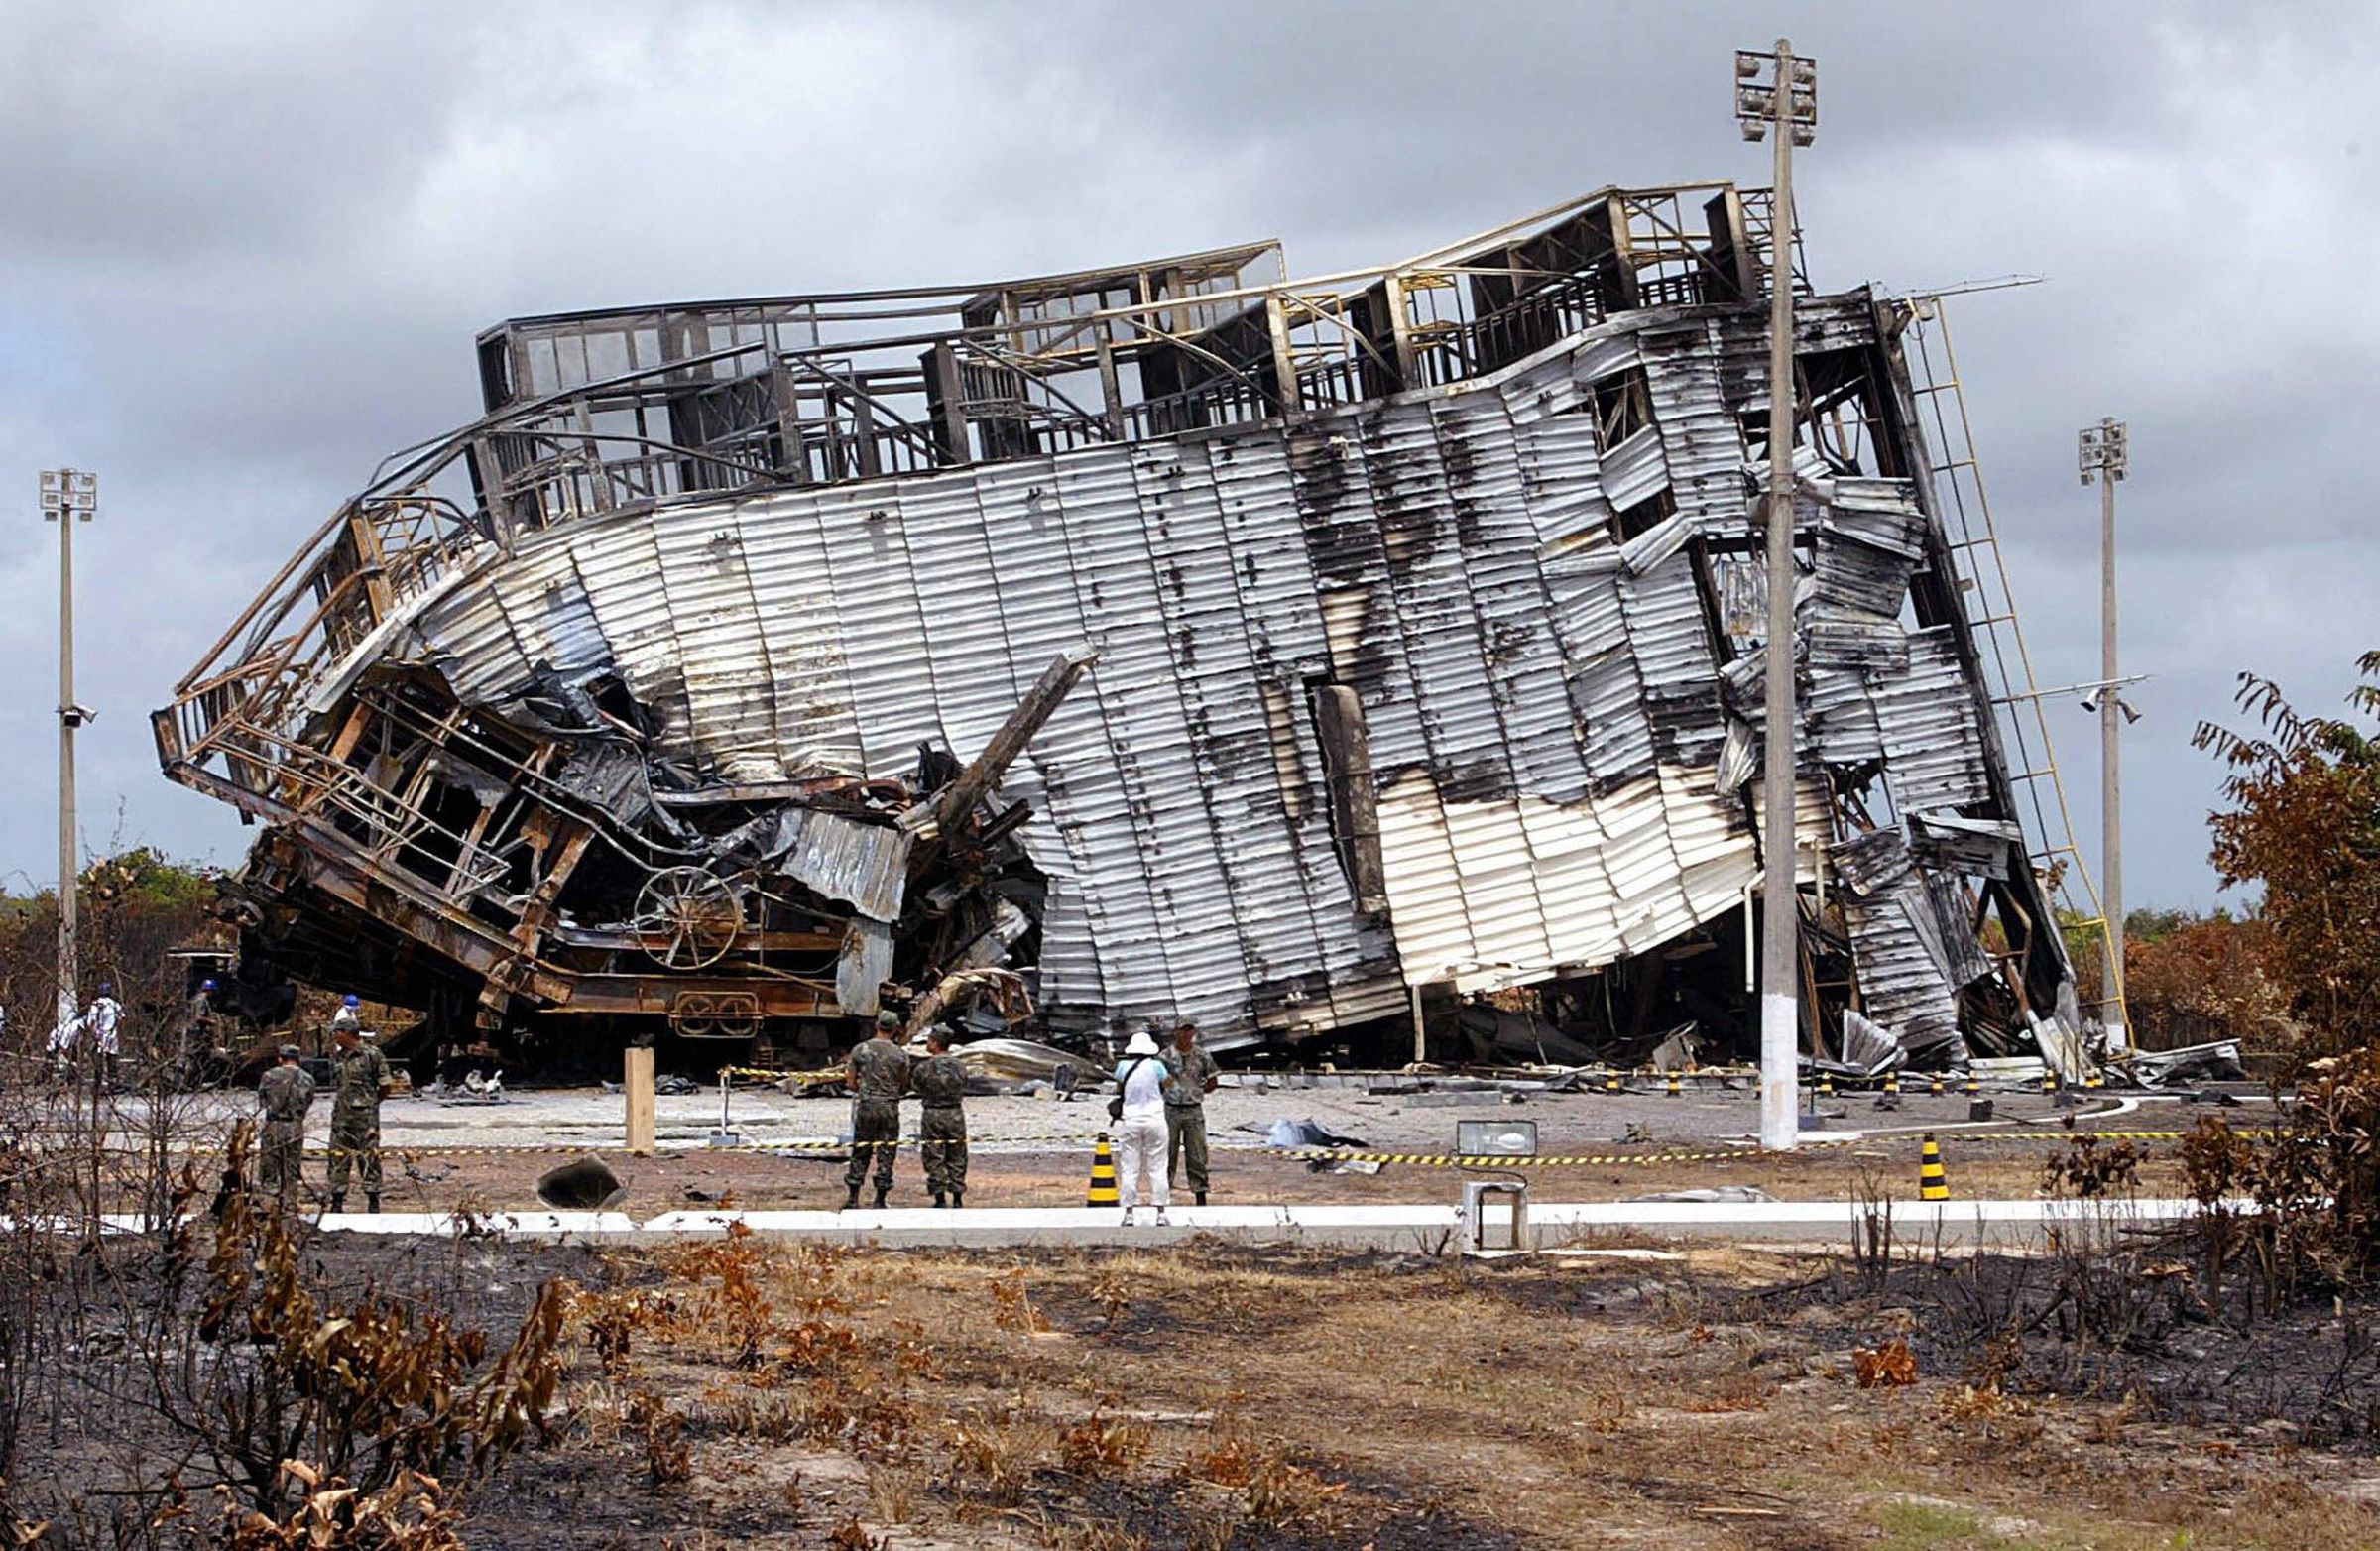 Wreckage at the Alcântara Launch Center, following the 2003 explosion.